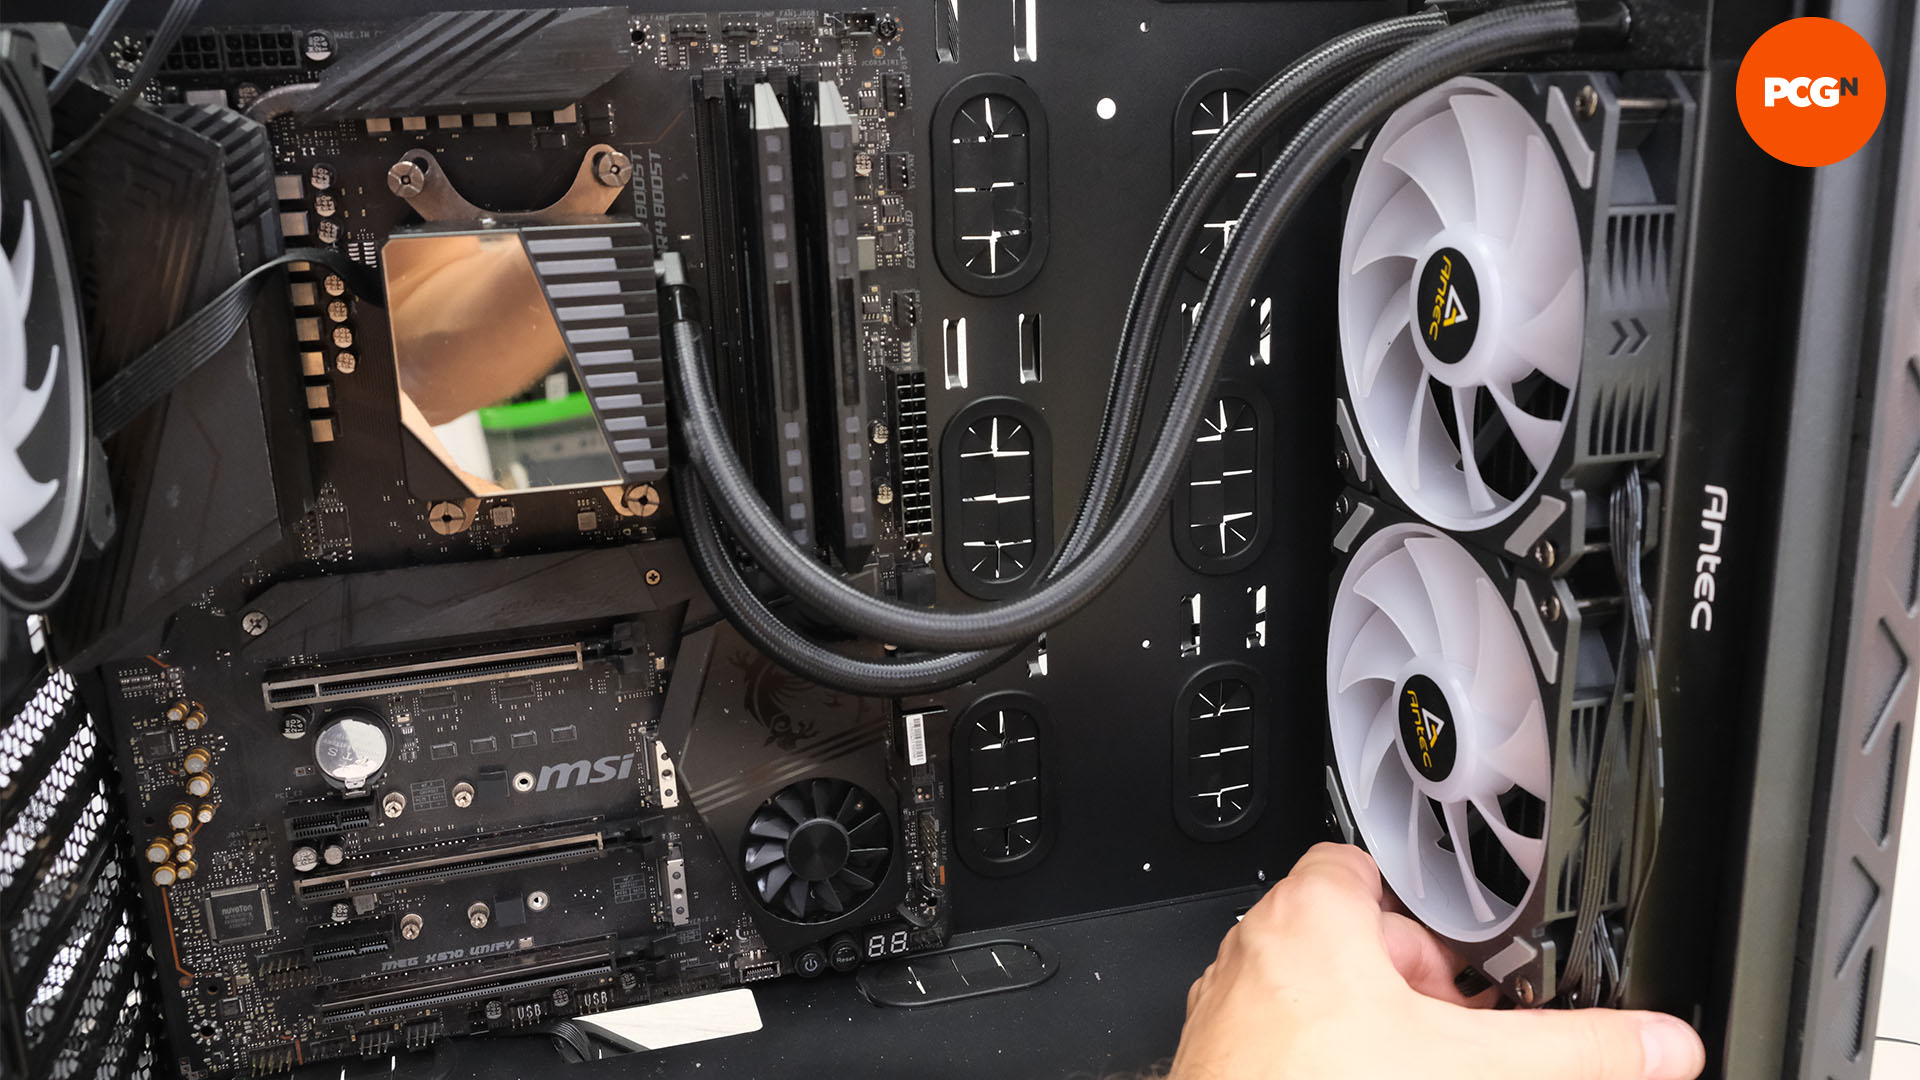 How to build a gaming PC: You can mount an AIO cooler in the front of your case